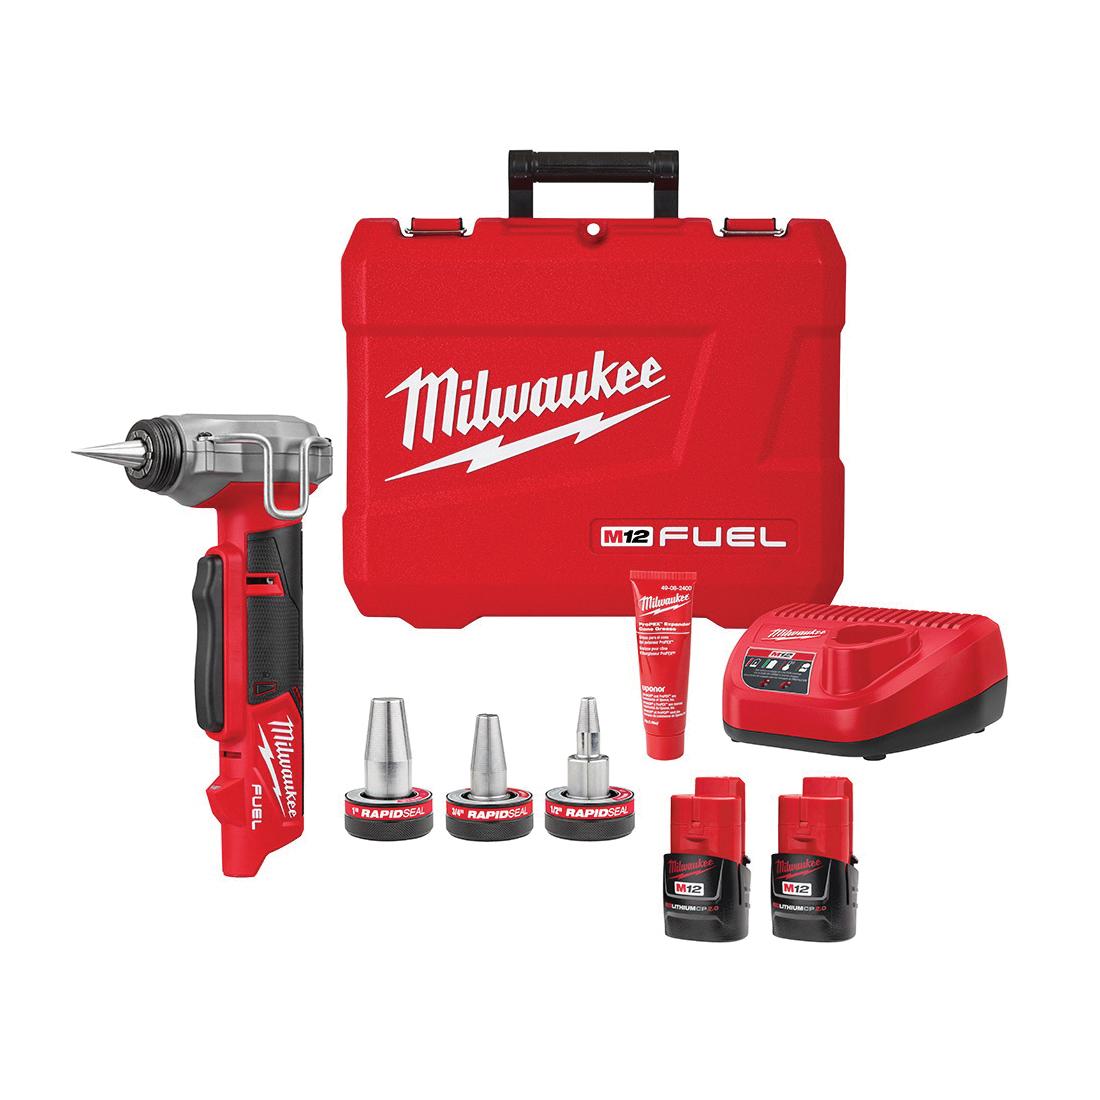 Milwaukee® 2532-22 M12 FUEL™ ProPEX® Expander Kit With RAPID SEAL™ ProPEX® 1/2 to 1 in Expander Heads, 3/8 to 1 in Expansion Tool Pipe, 12 V, Lithium-Ion Battery